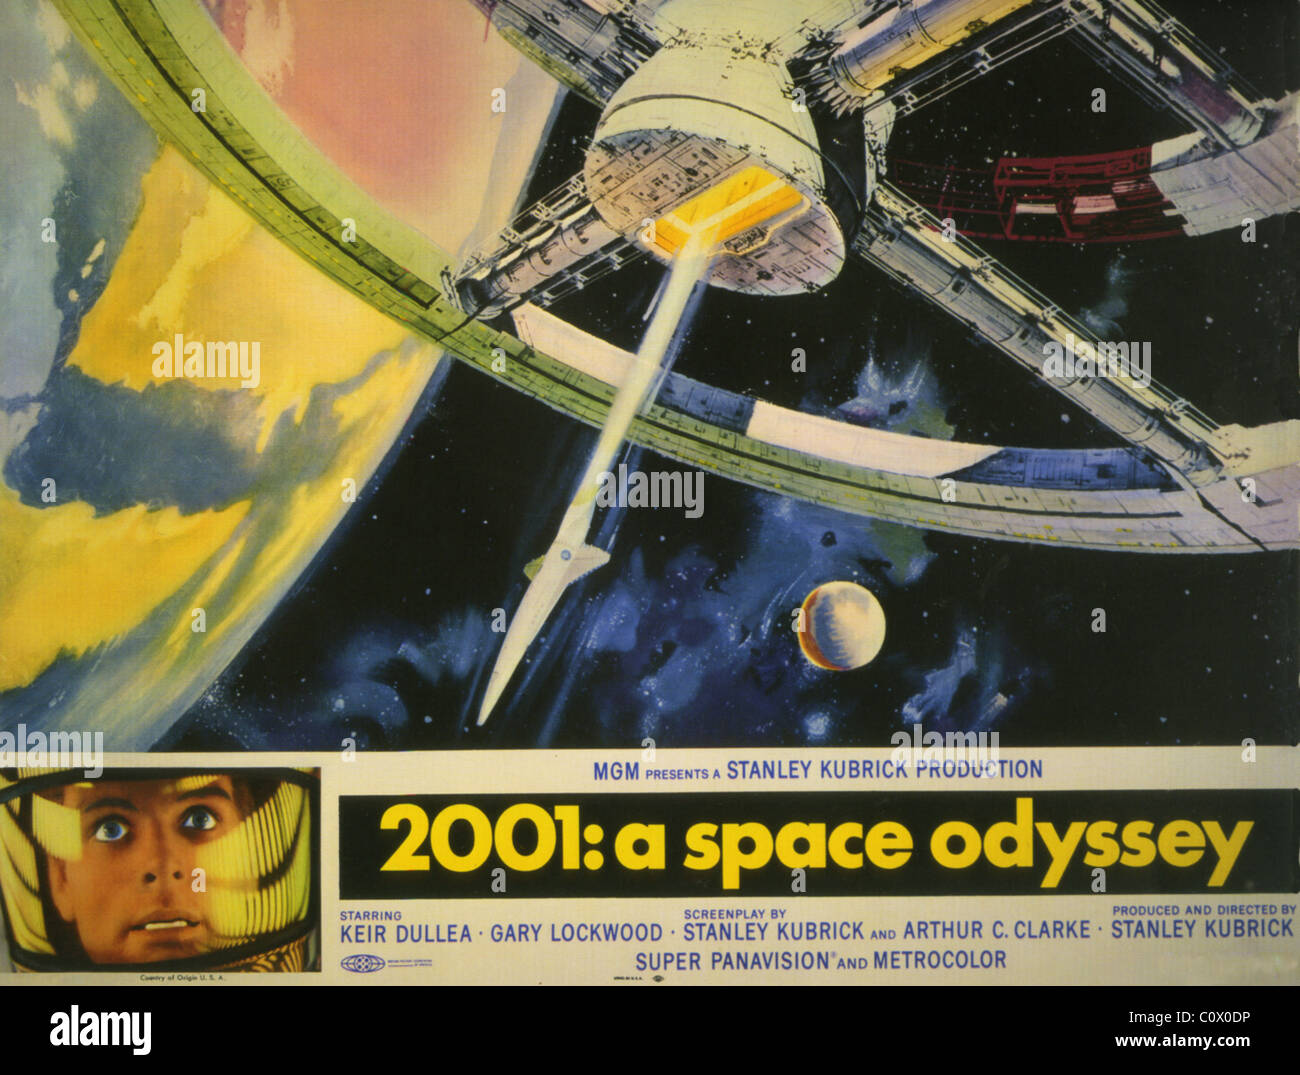 2001: A SPACE ODYSSEY Poster for 1968 MGM film directed by Stanley Kubrick Stock Photo